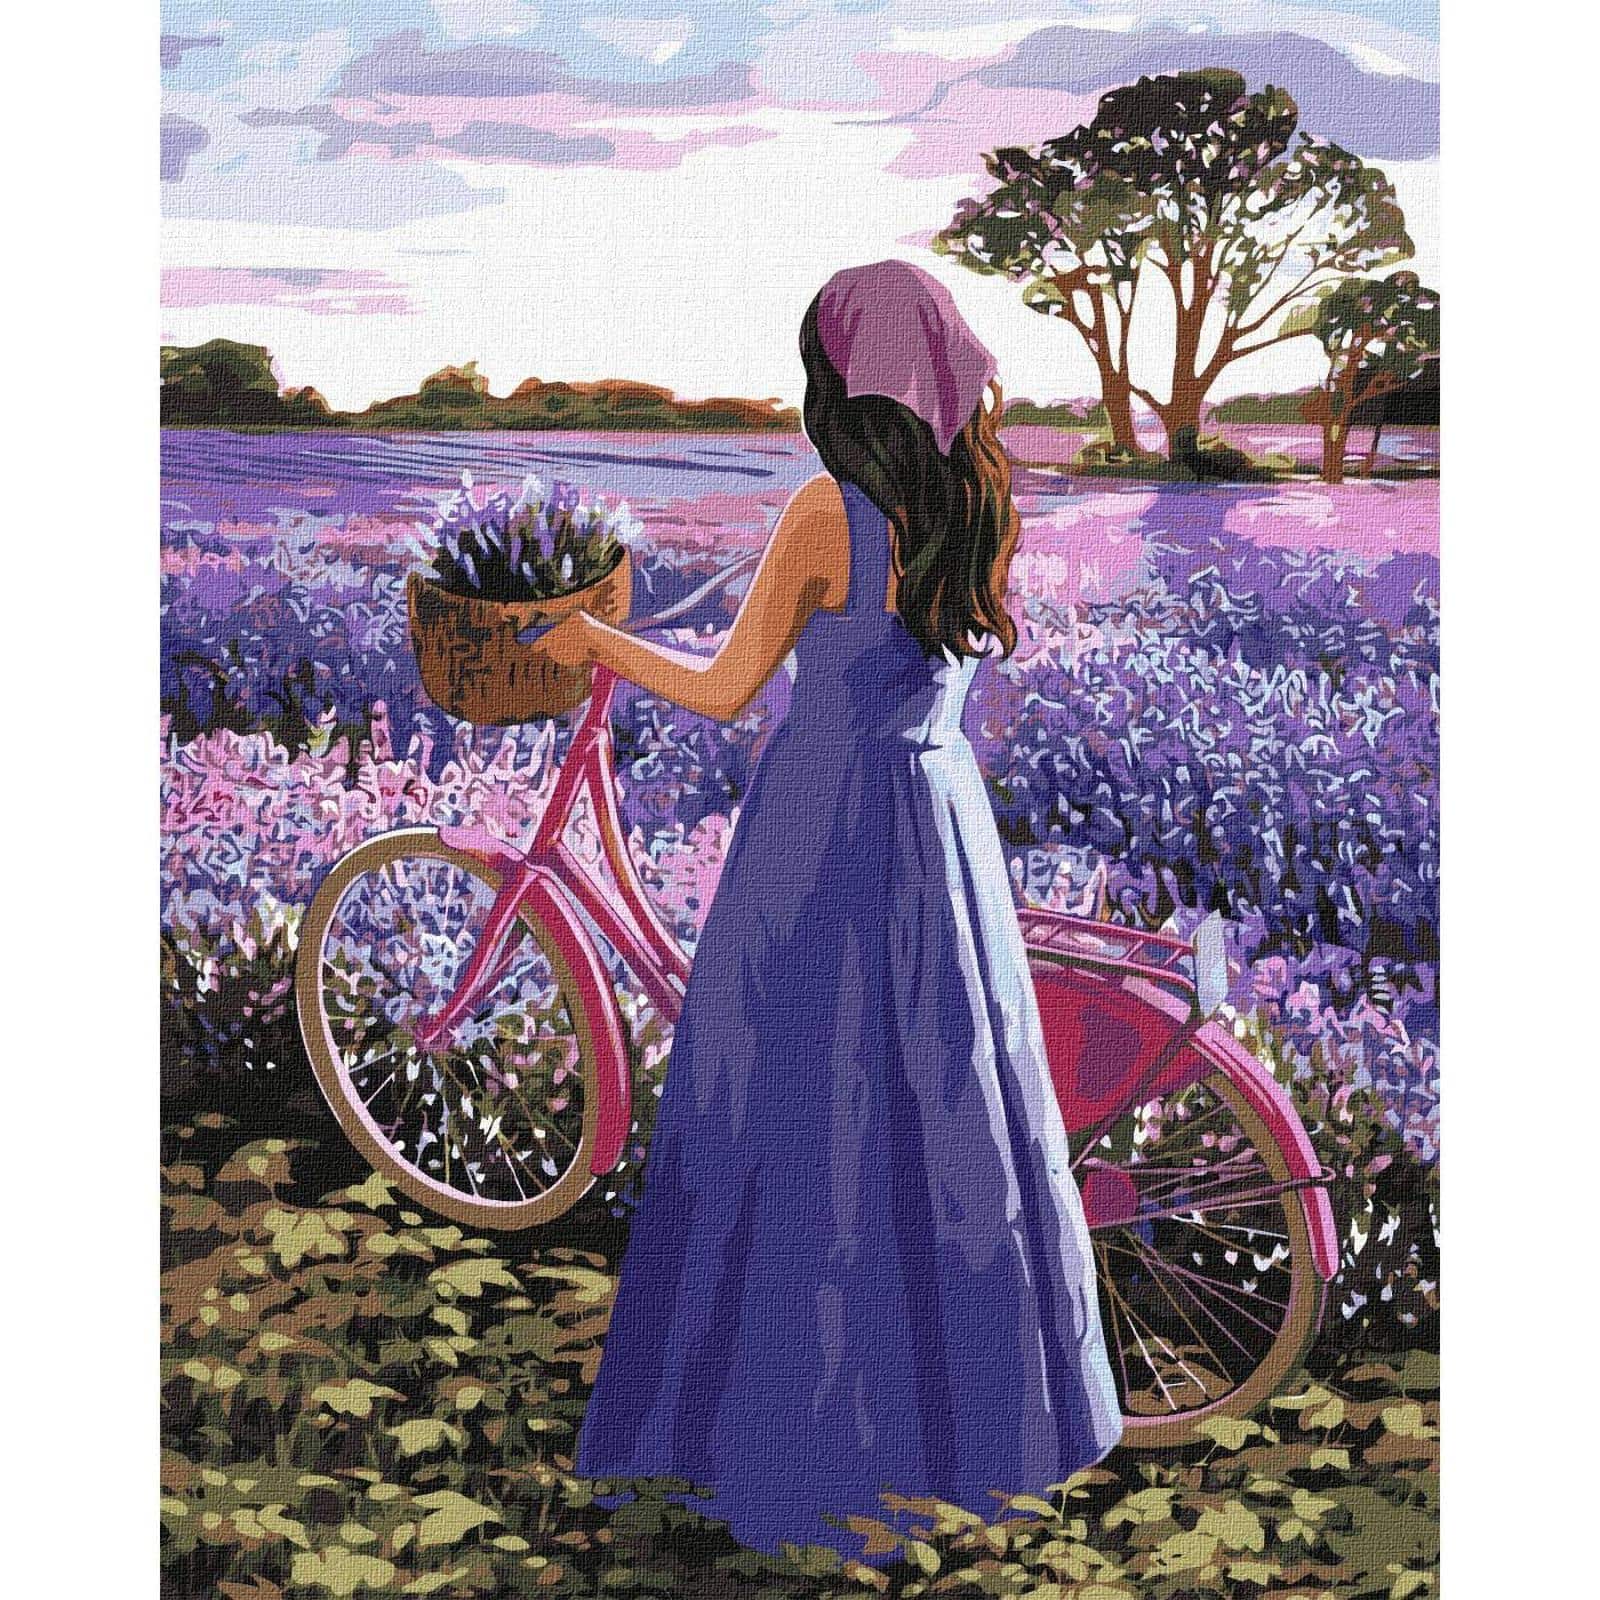 Ideyka Lavender Inspiration Painting by Numbers Kit